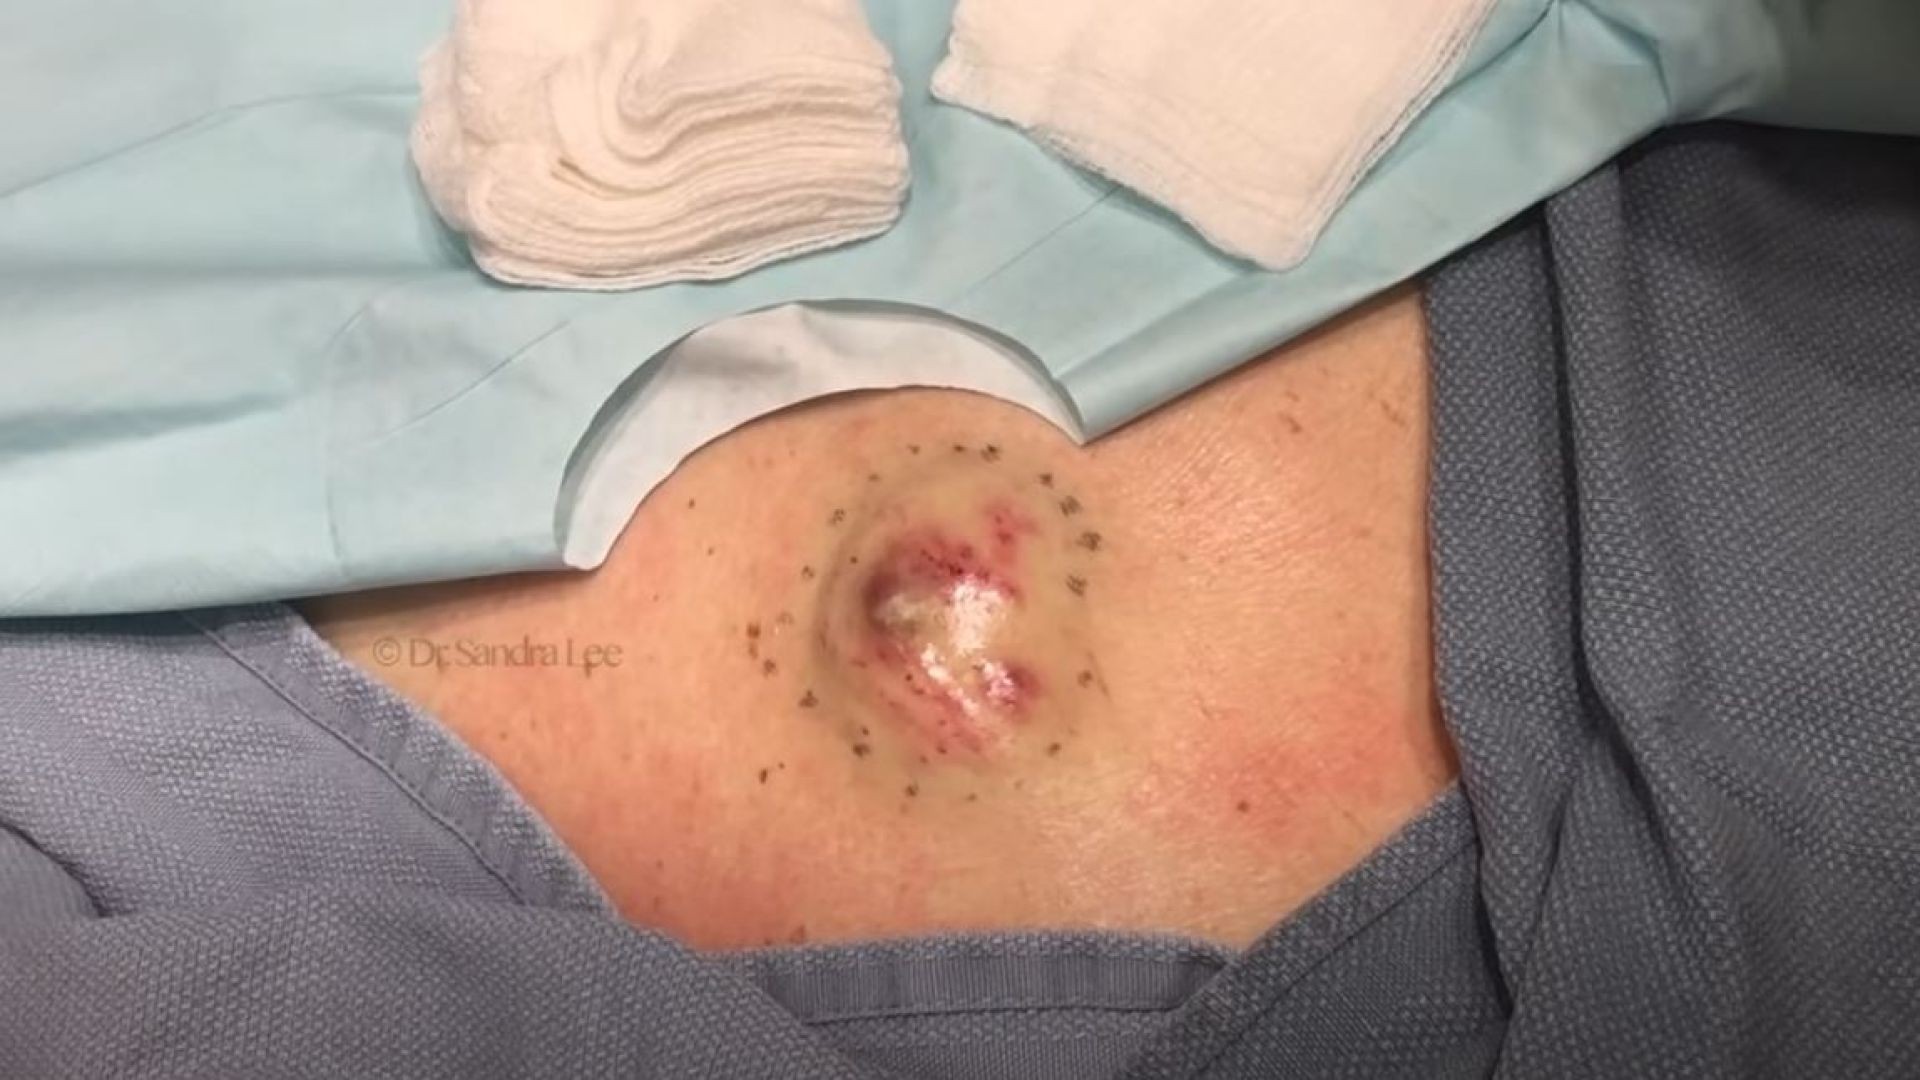 Cyst on back removal